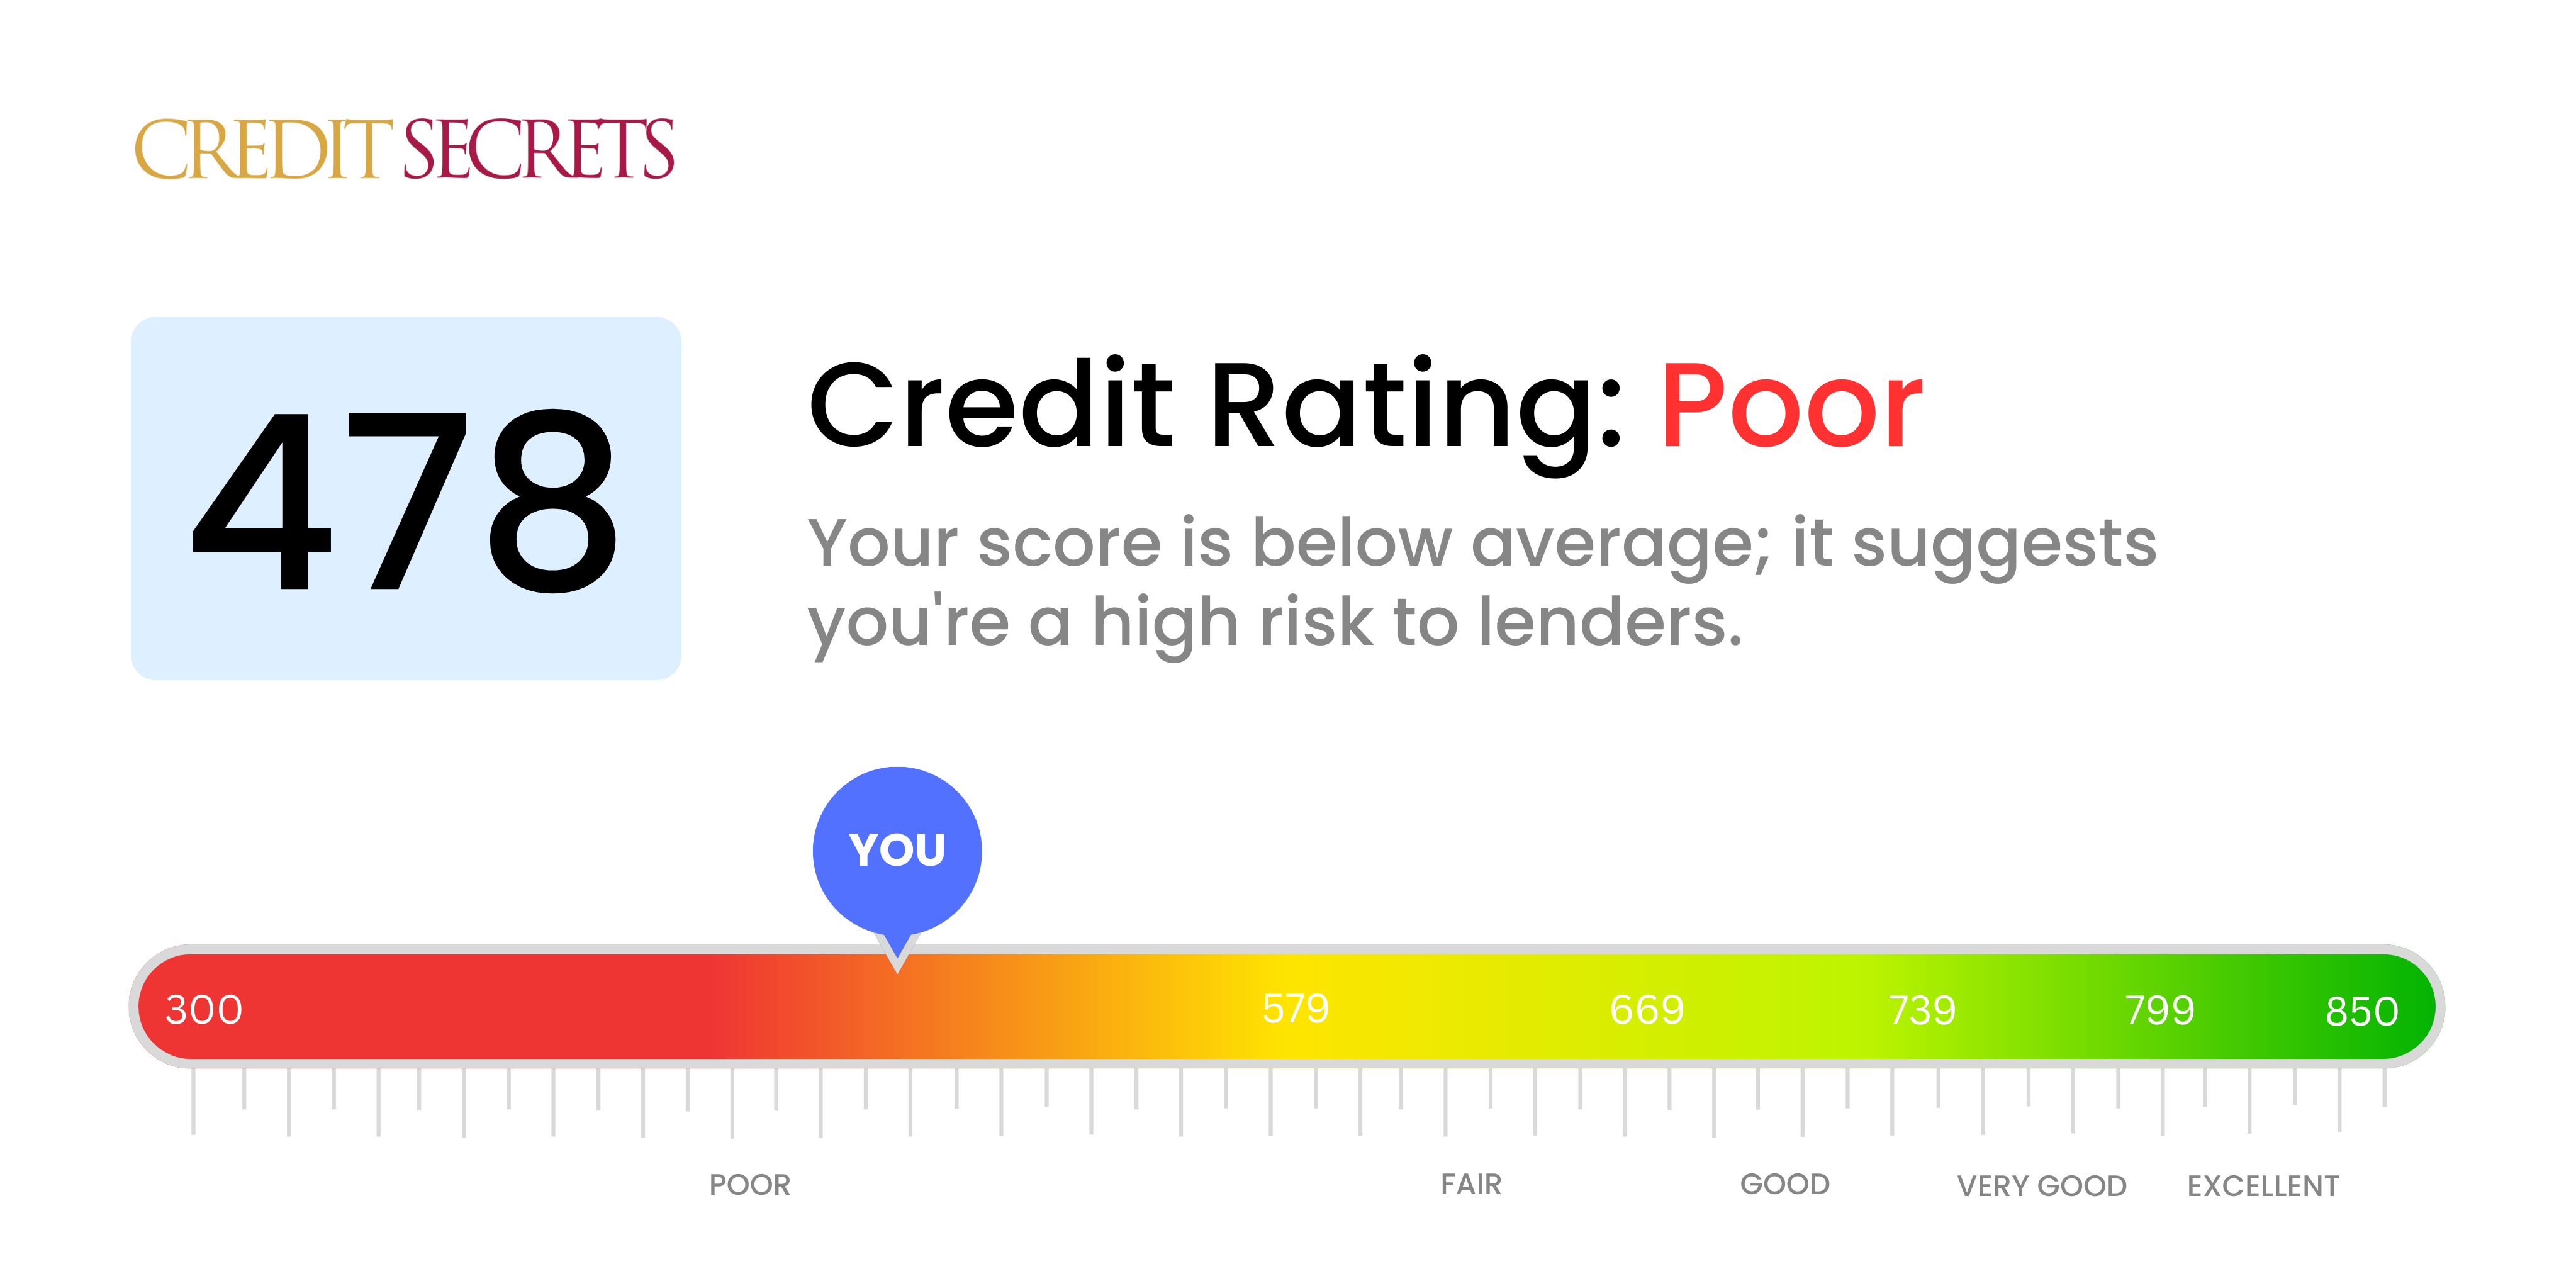 Is 478 a good credit score?